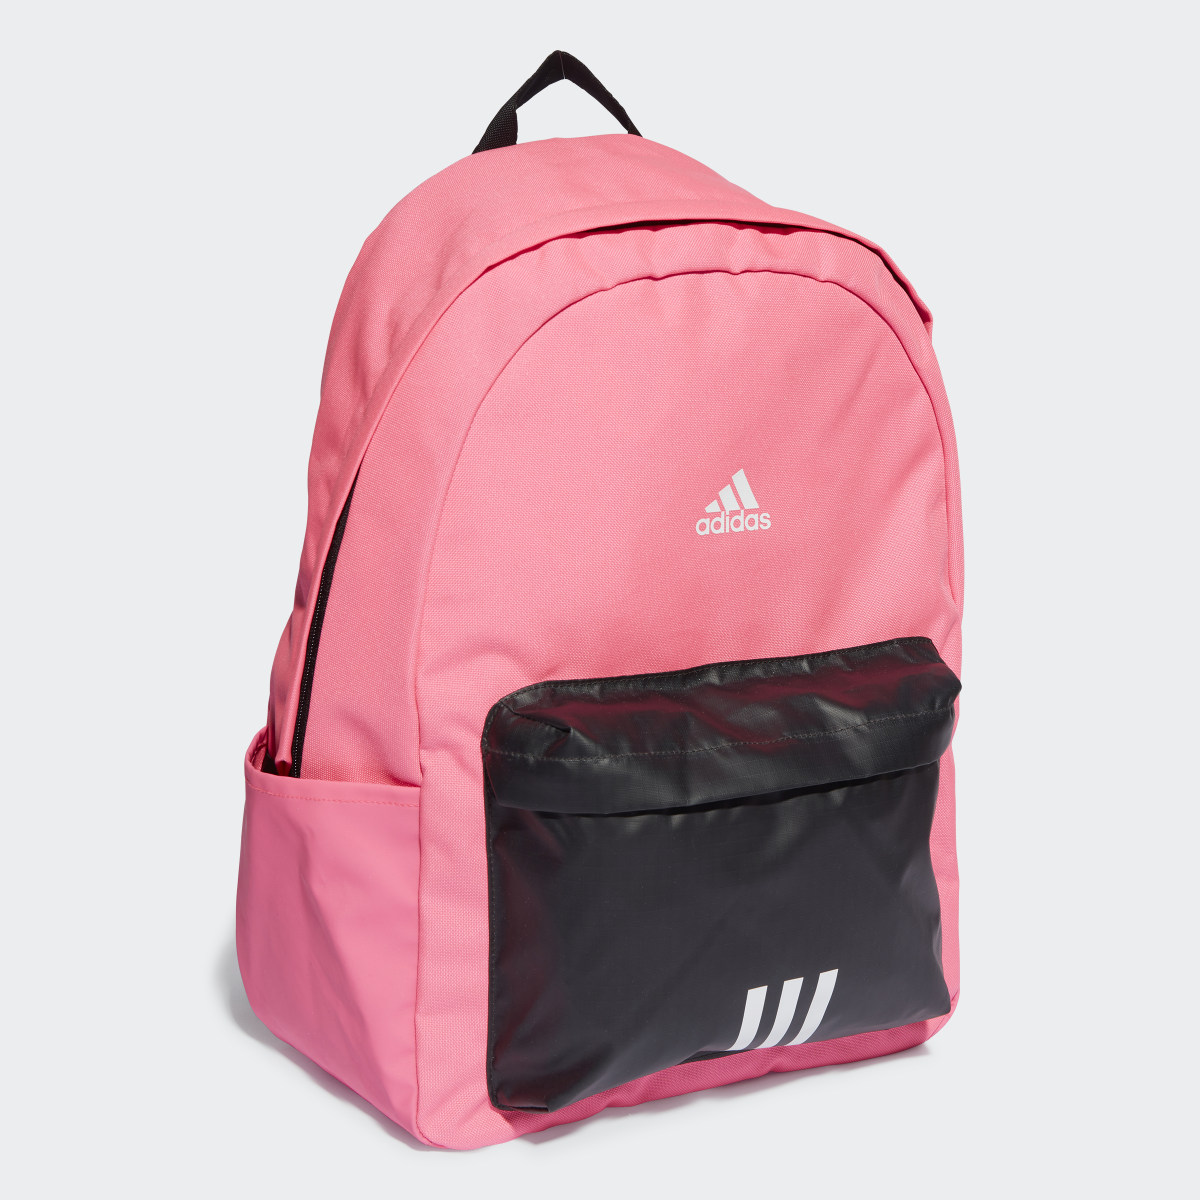 Adidas Classic Badge of Sport 3-Stripes Backpack. 4